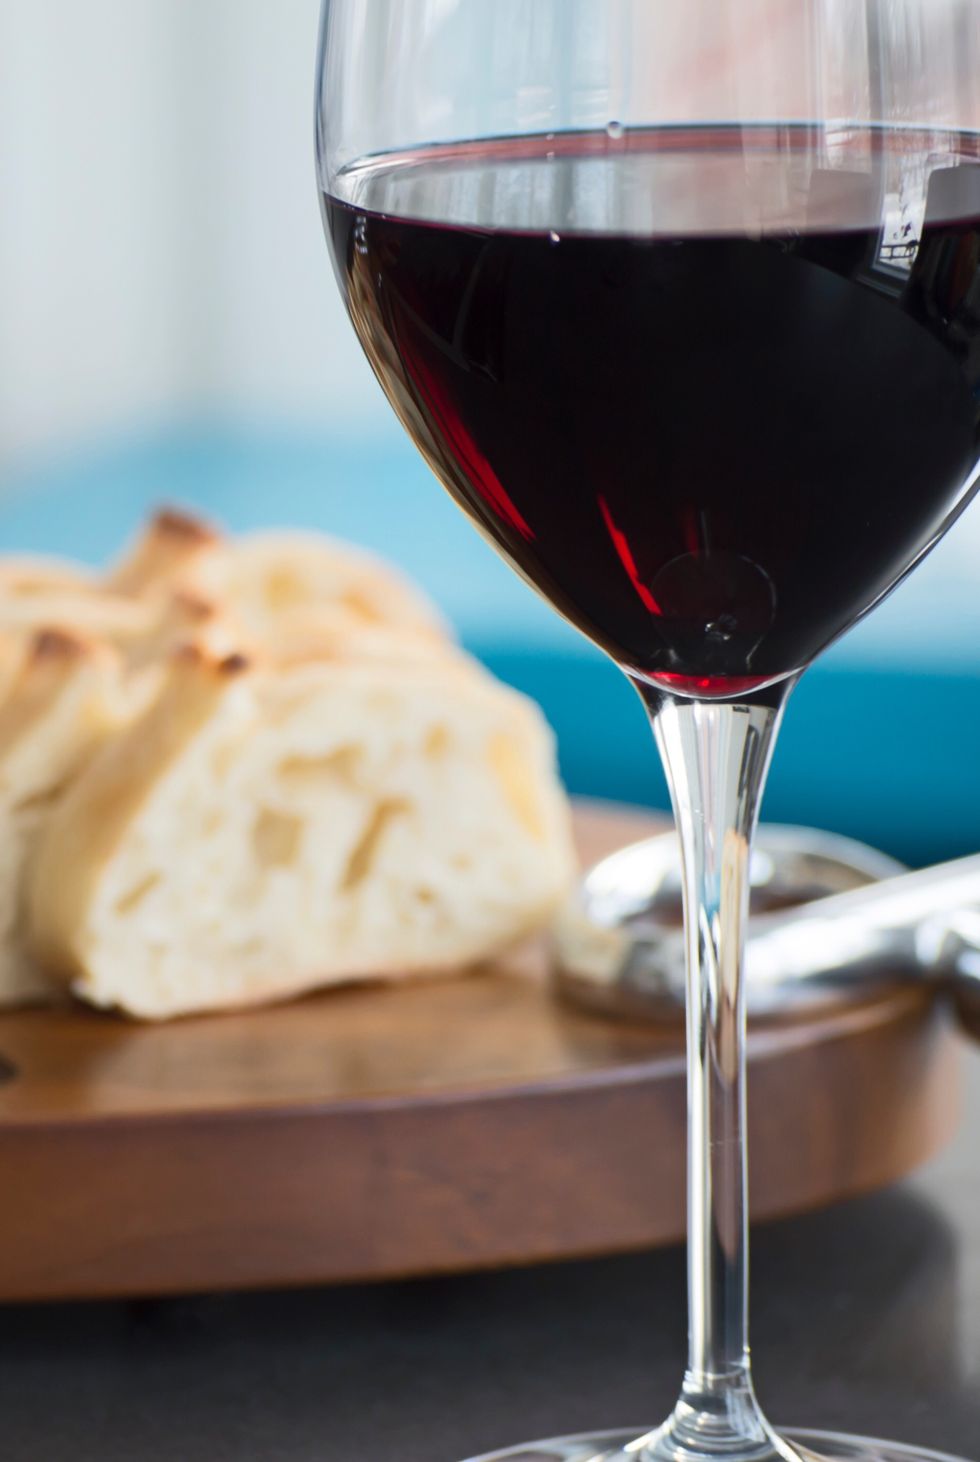 Good Friday Facts Fasting Lent Bread Wine on Table